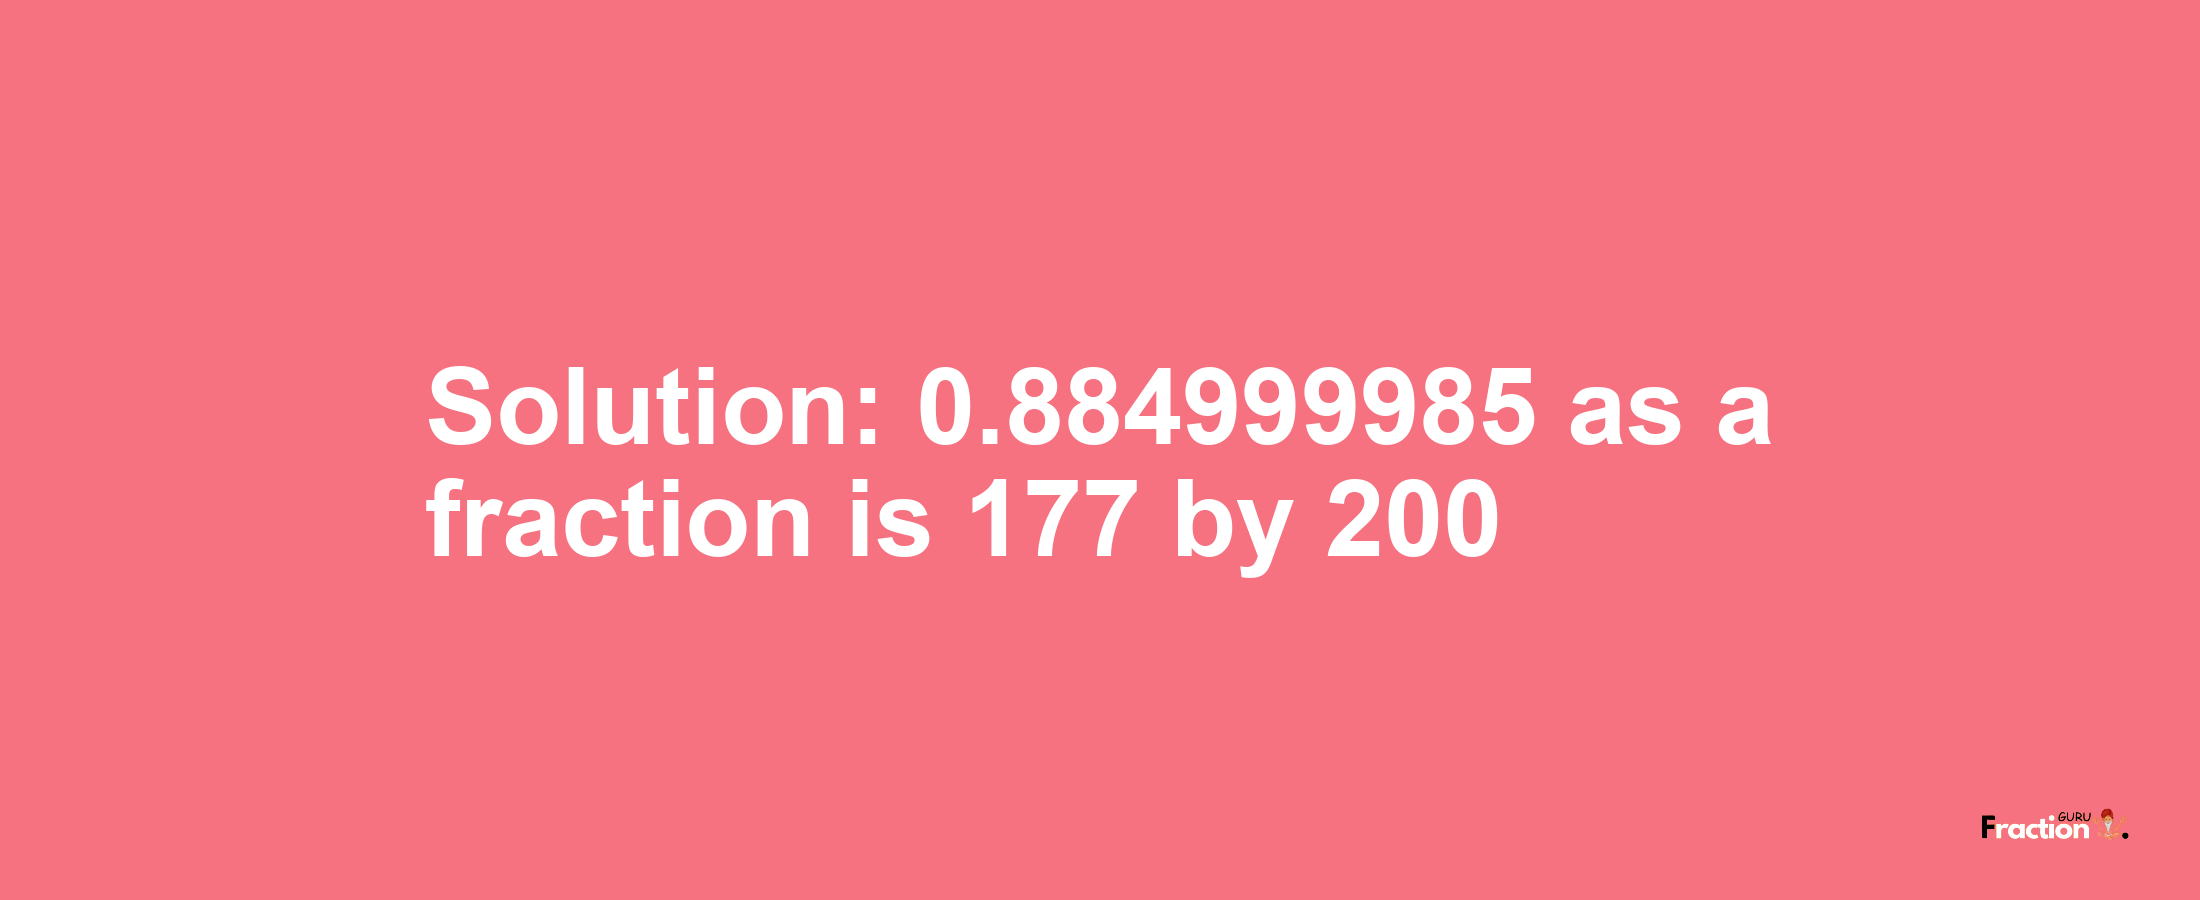 Solution:0.884999985 as a fraction is 177/200